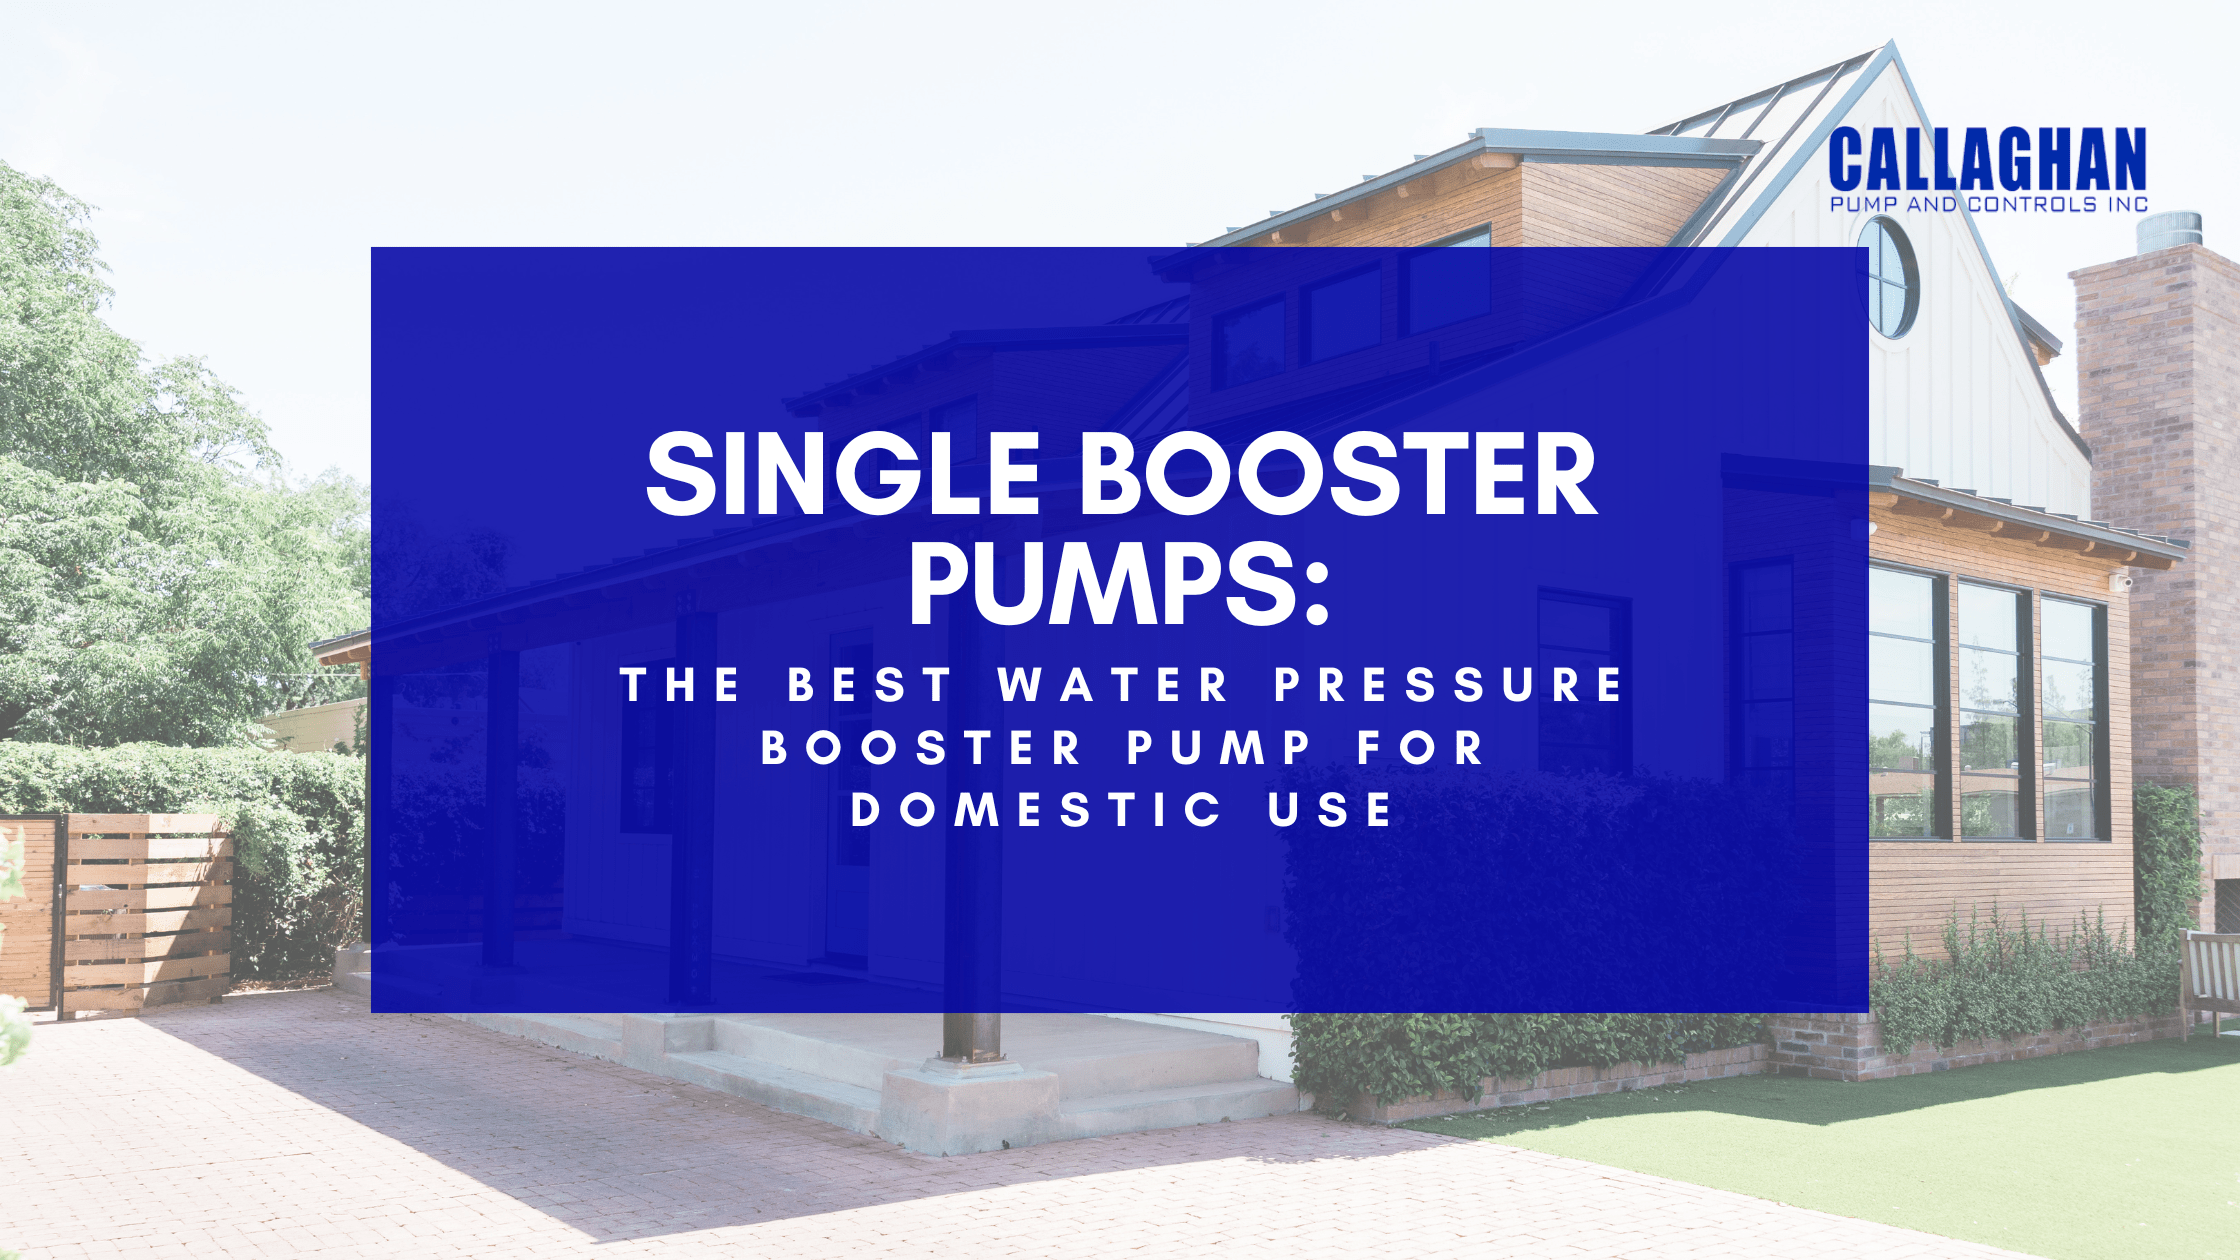 Single Booster Pumps: The Best Water Pressure Booster Pump for Domestic Use